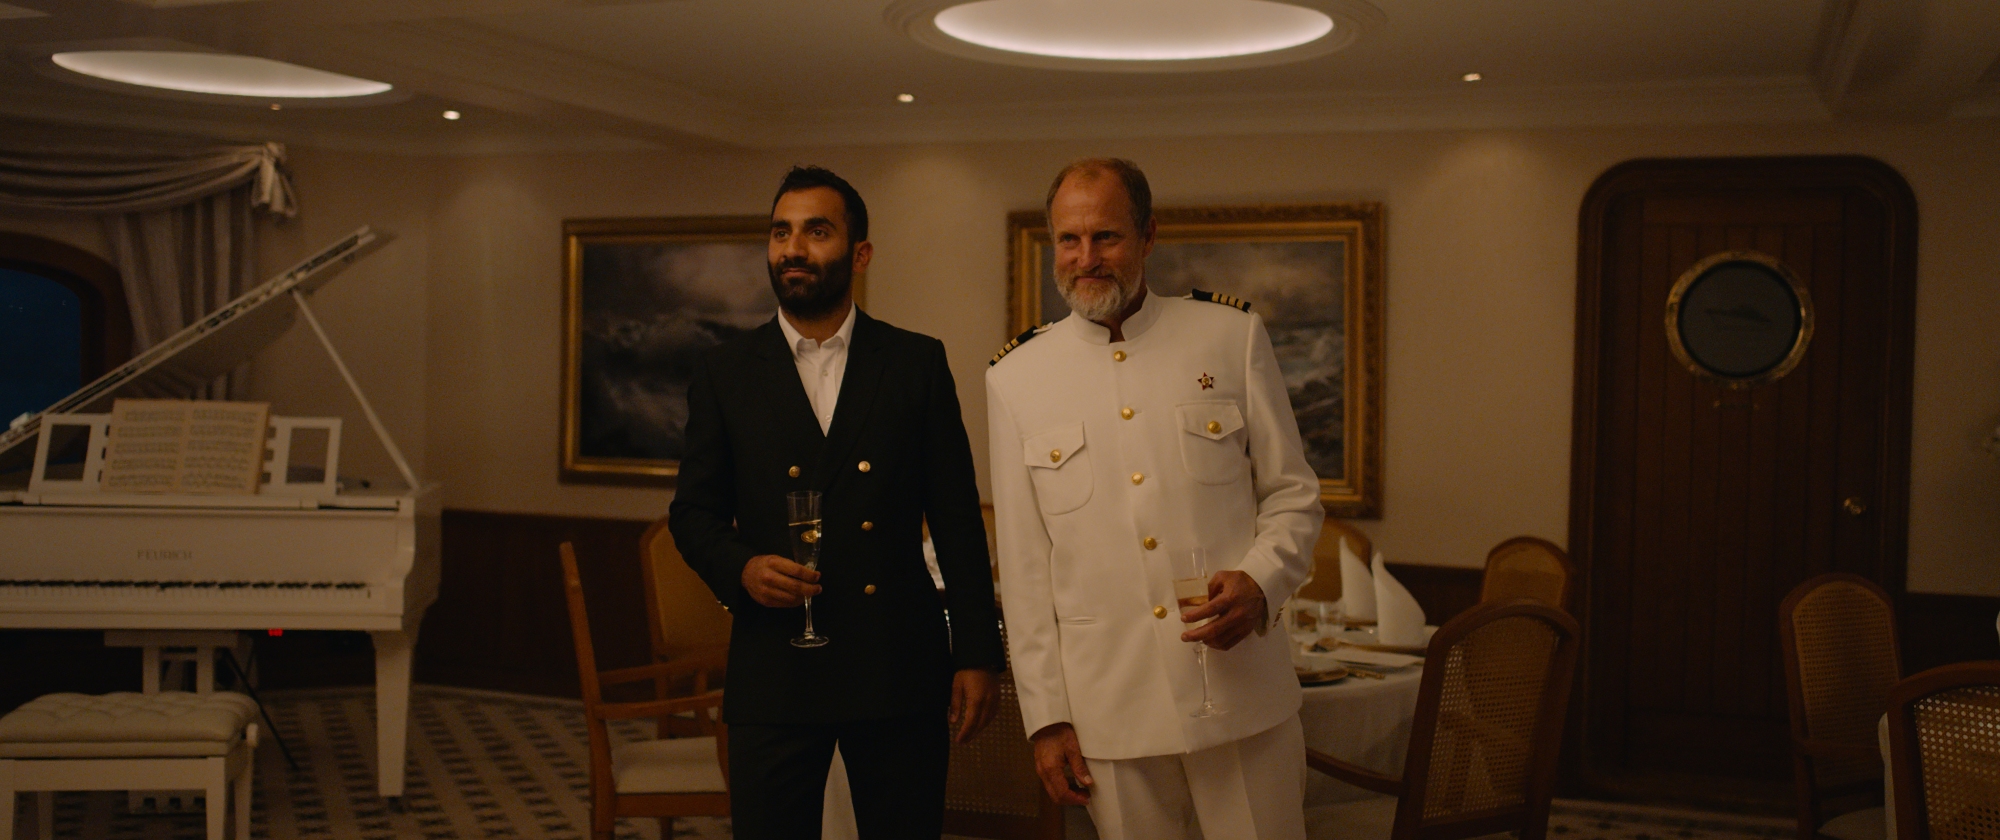 'Triangle of Sadness' Darius as Arvin Kananian and Woody Harrelson as The Captain with close-mouthed grins. They're wearing formal crew and captain-wear while holding a glass of champagne.